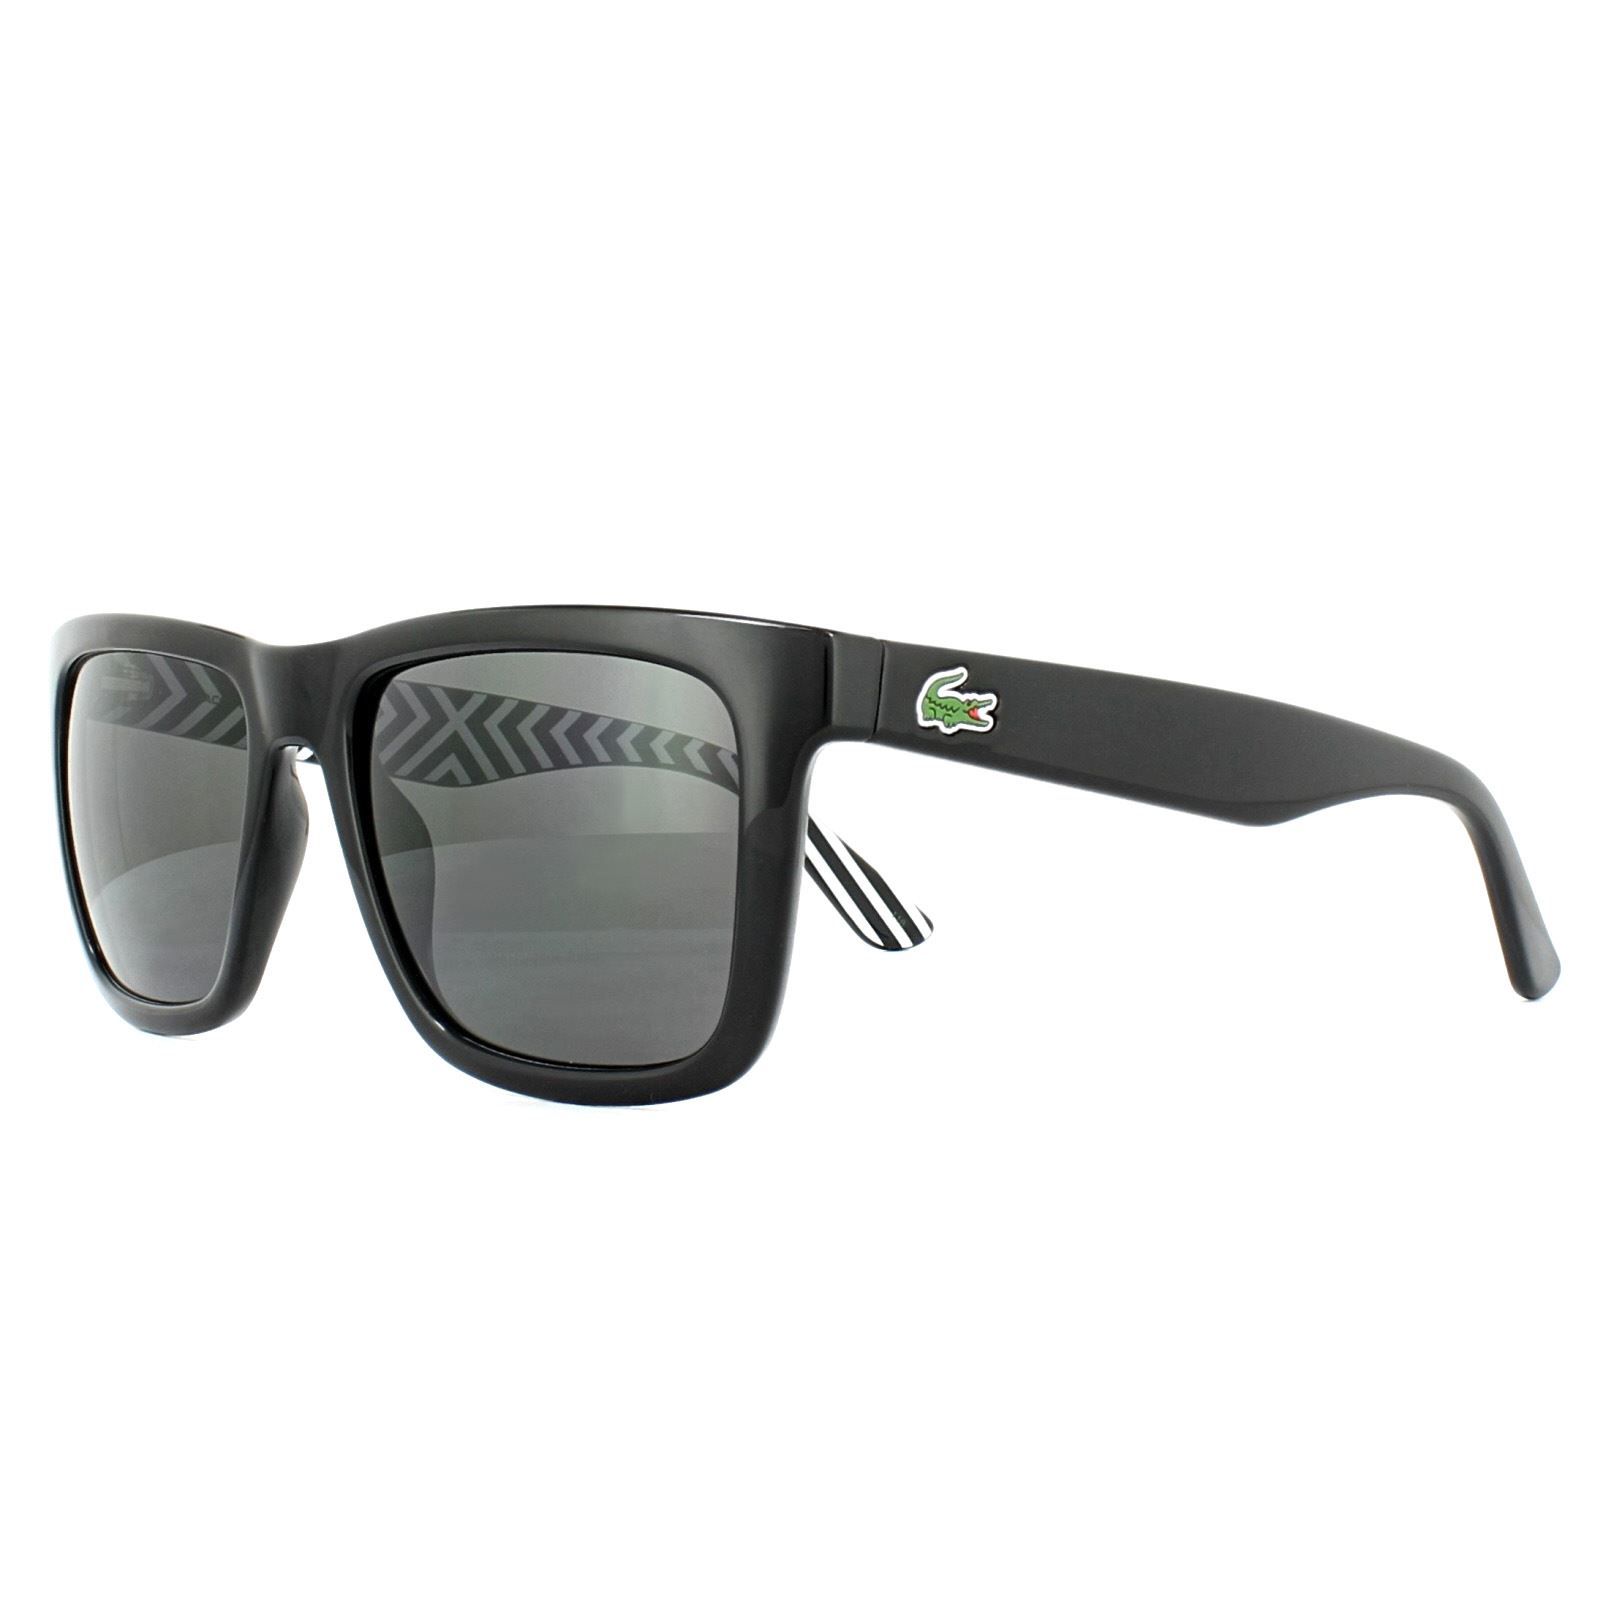 Lacoste Sunglasses L750S 001 Black Grey are a simple style with a classic rectangular look with the instantly recognisable alligator logo on the temple. AN interesting black and white inside pattern completes the look.